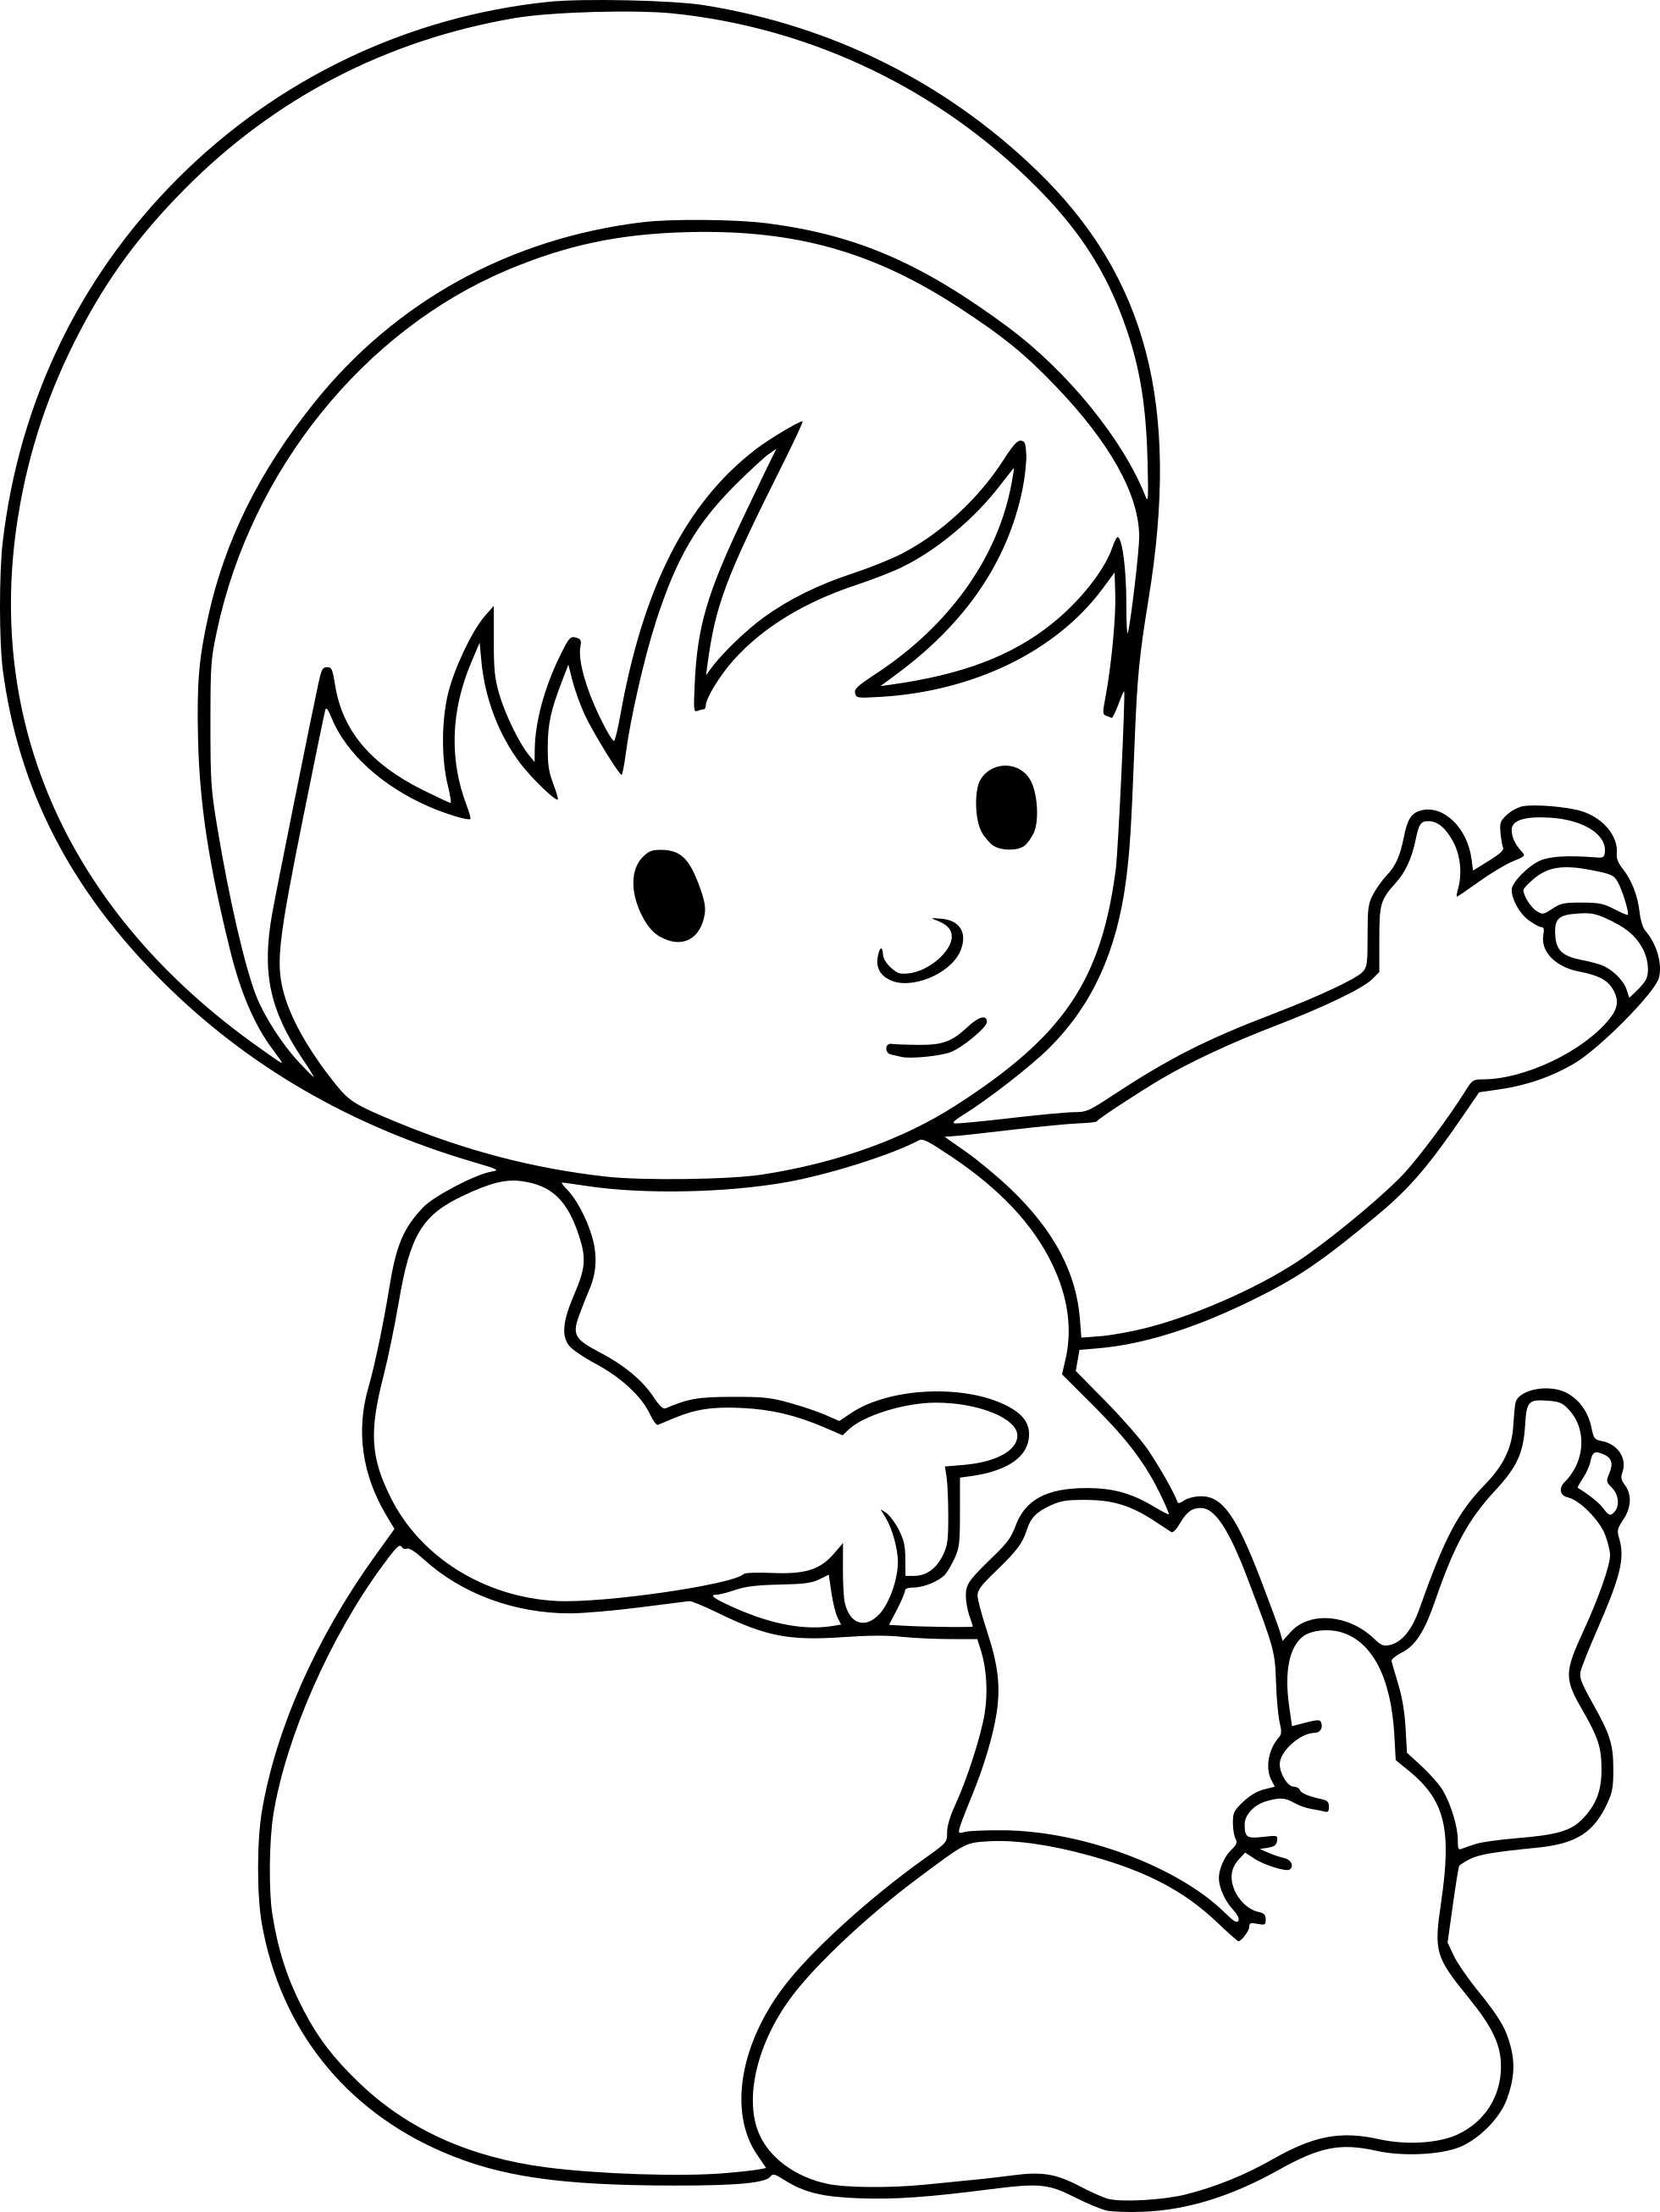 Gorgeous coloring pages for dolls